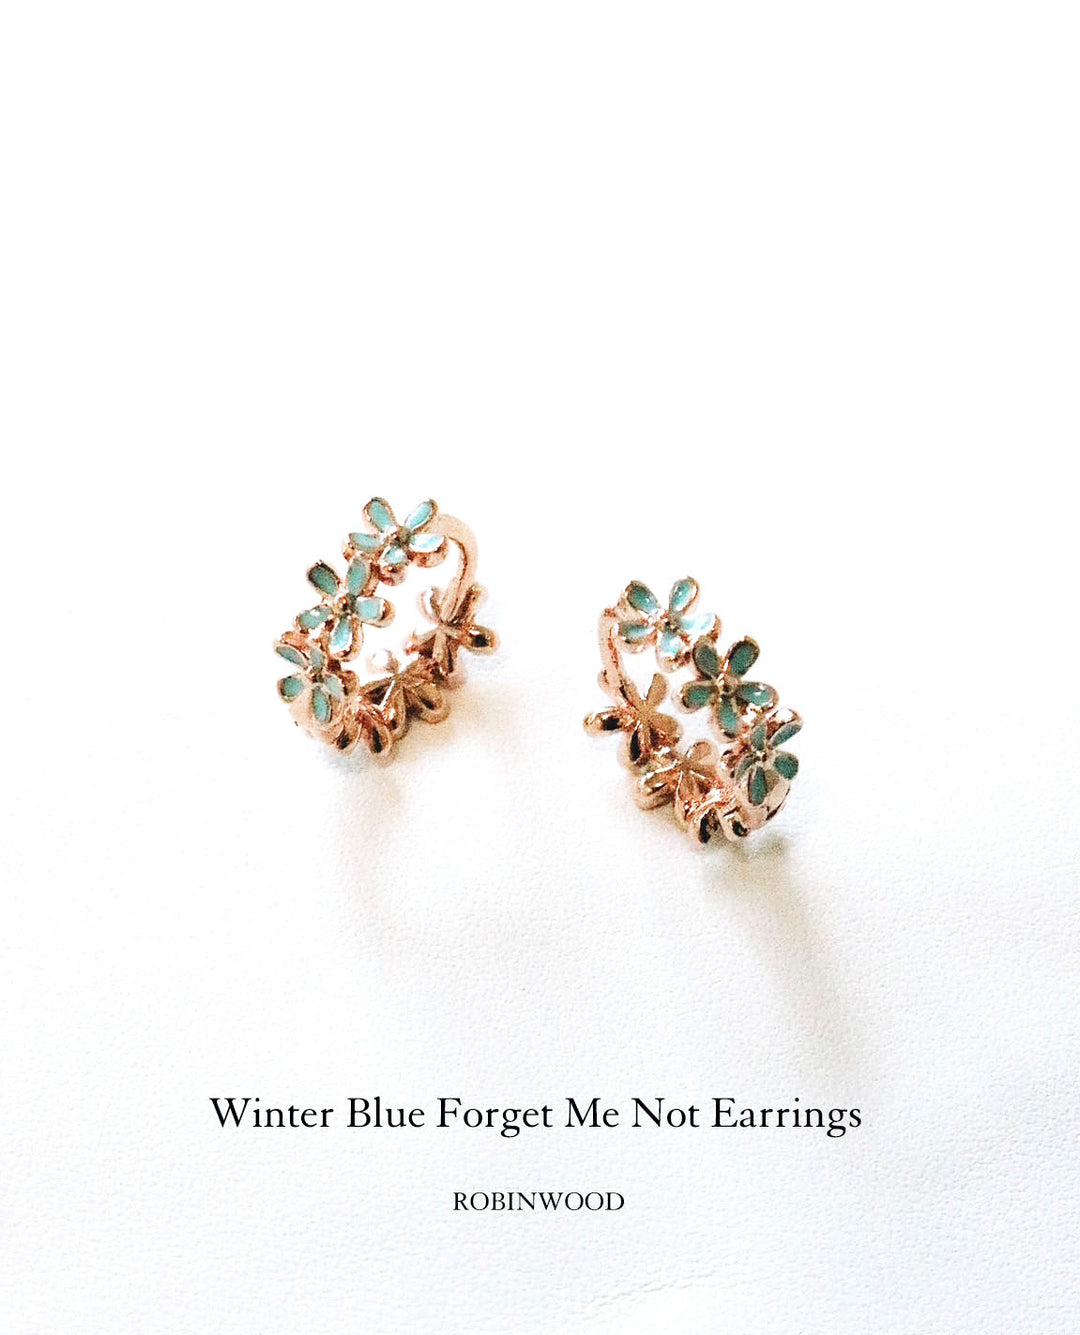 Limited Collection's " Winter Forget Me Not Earrings ", Robinwood, Masterpieces